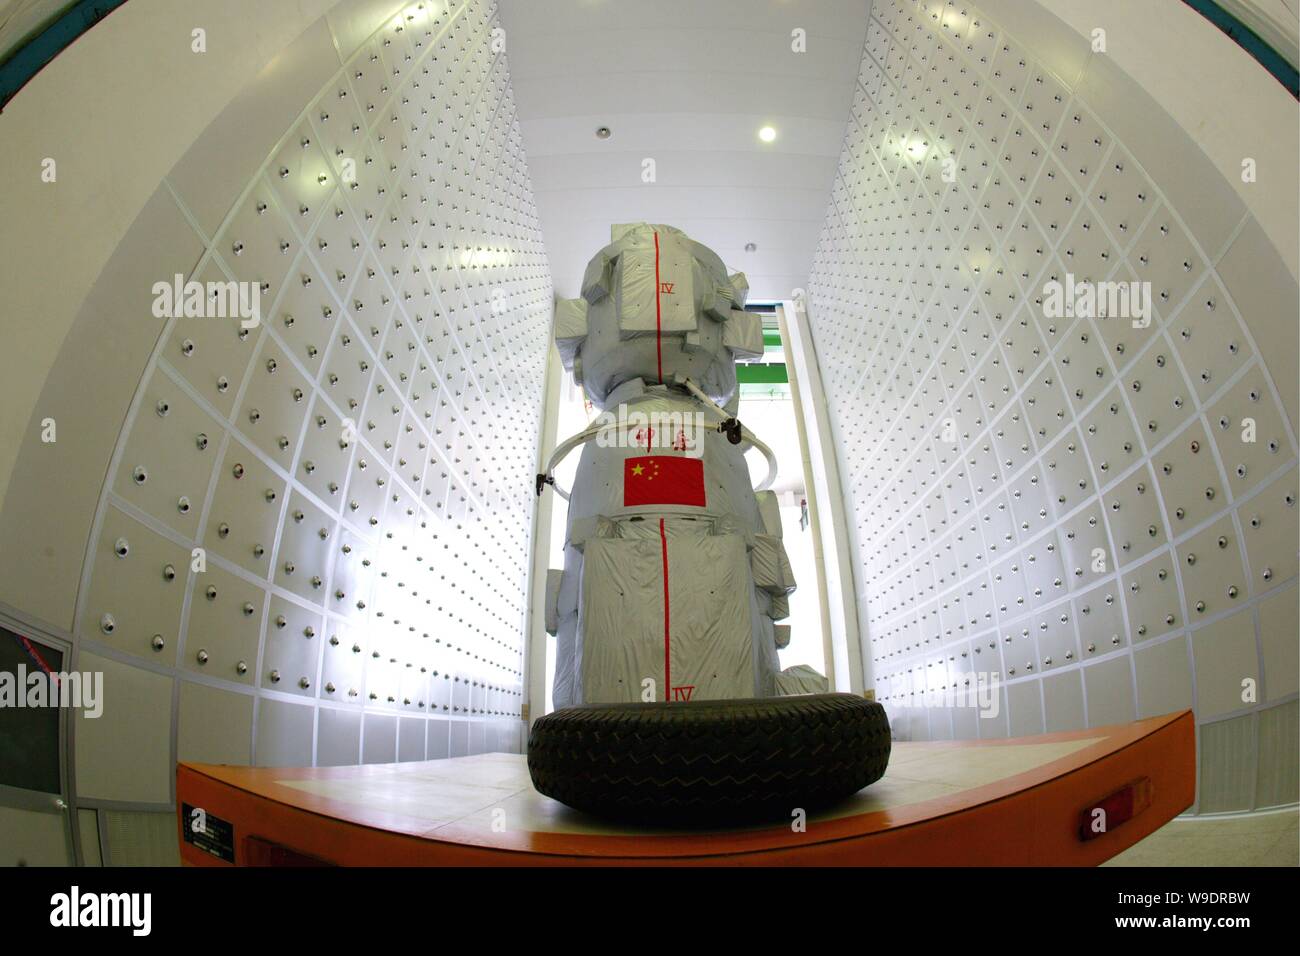 Chinese aeronautical scientists and workers transport the Shenzhou VII manned spacecraft from the testing plant at Jiuquan Satellite Launch Center in Stock Photo